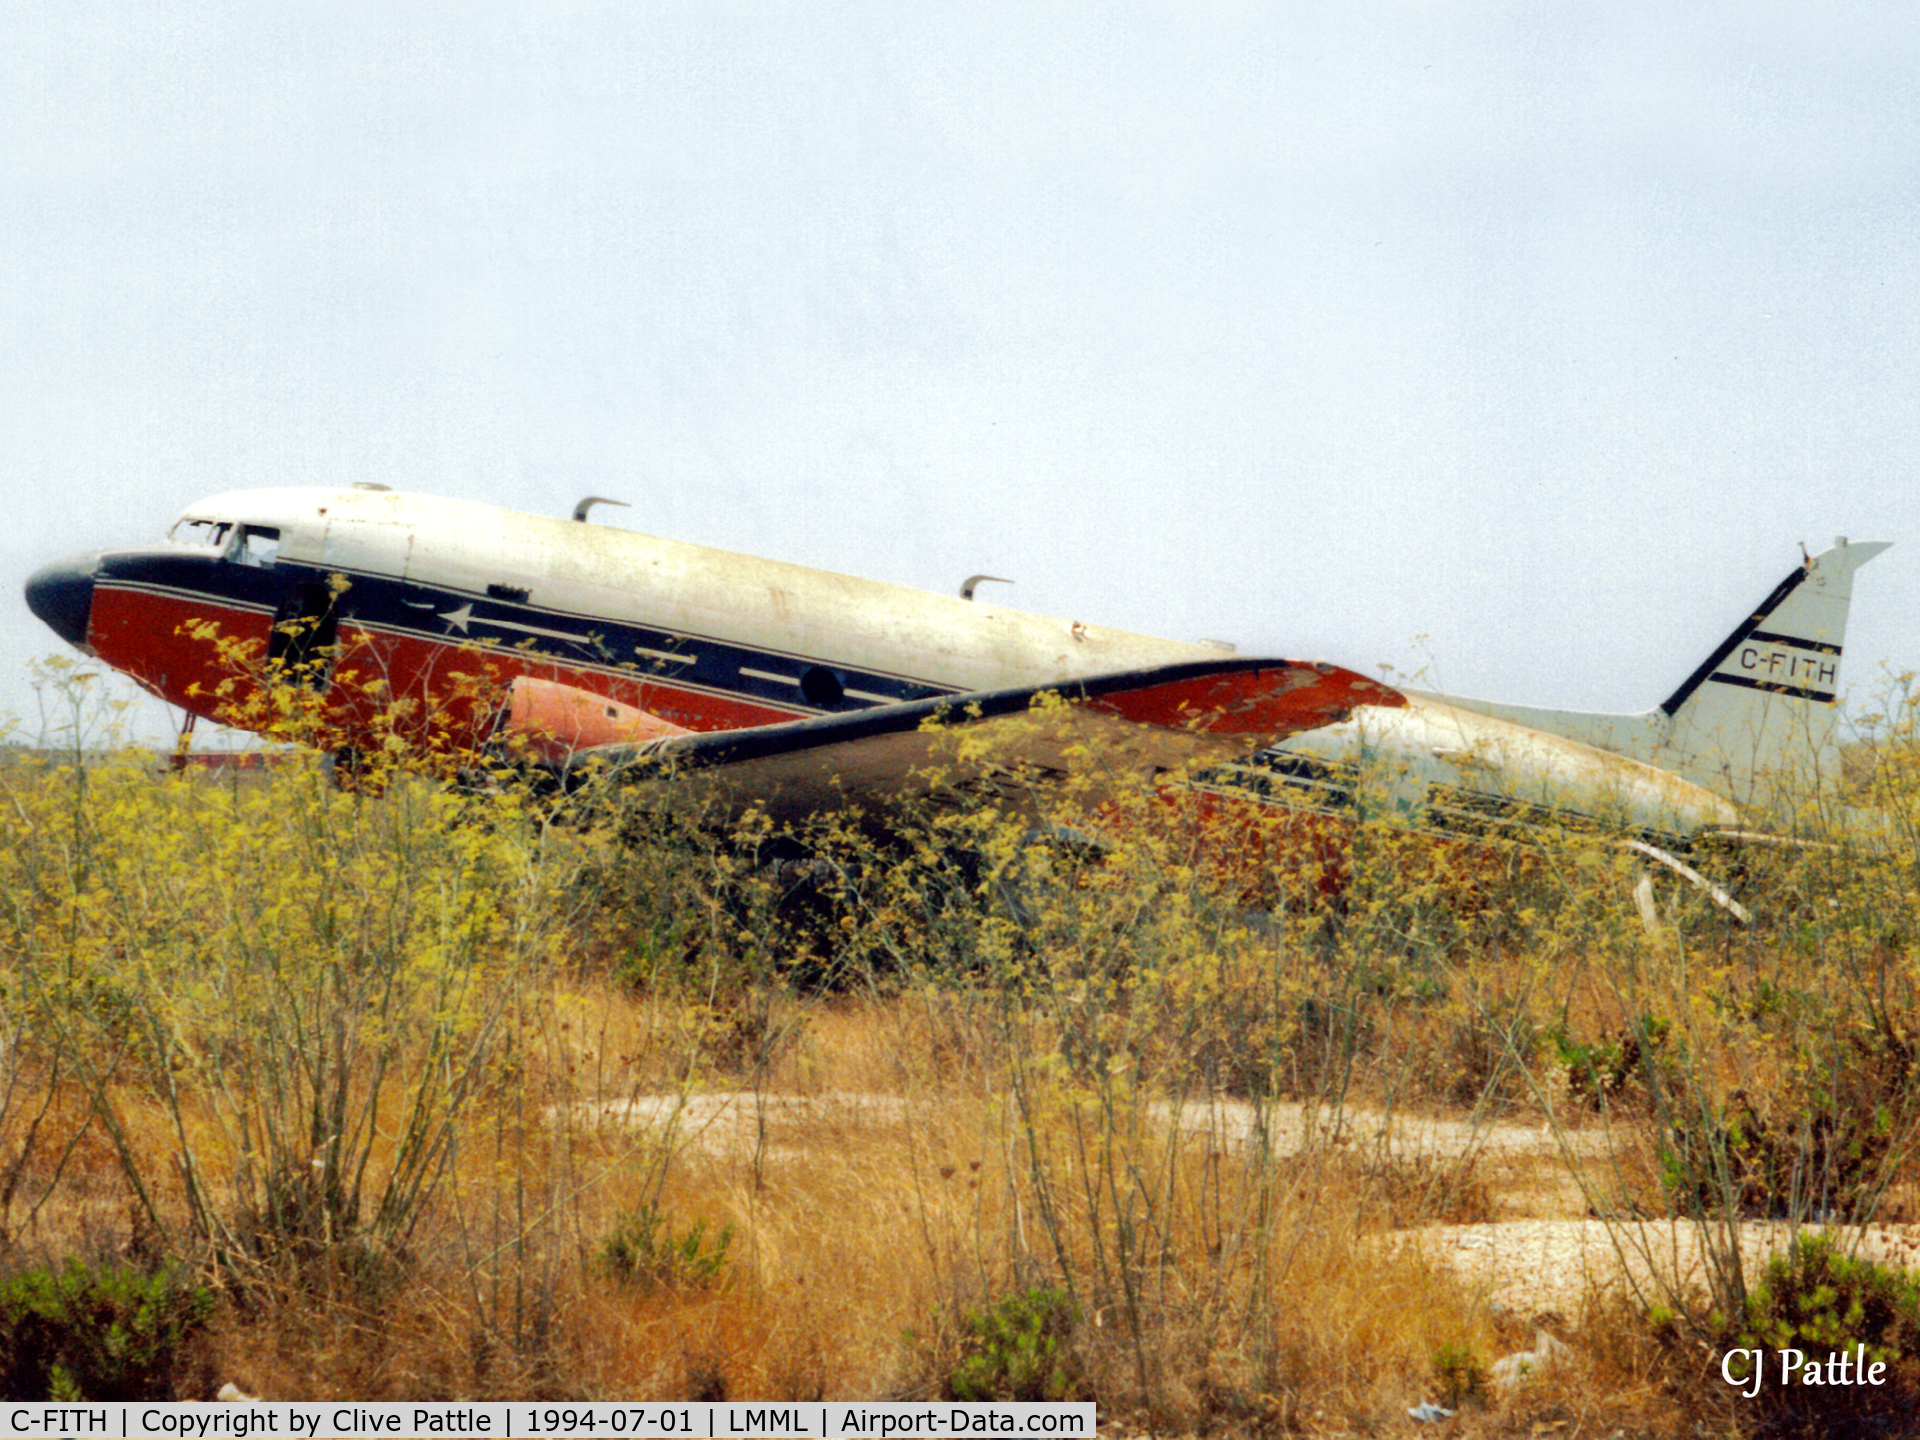 C-FITH, 1944 Douglas C-47A Skytrain C/N 20228, Scanned from print. Dakota C-FITH at the International Fire Training Centre, Hal Far (disused), Malta in '94. Later saved for preservation. ICAO LMML used for reference/search purposes only.